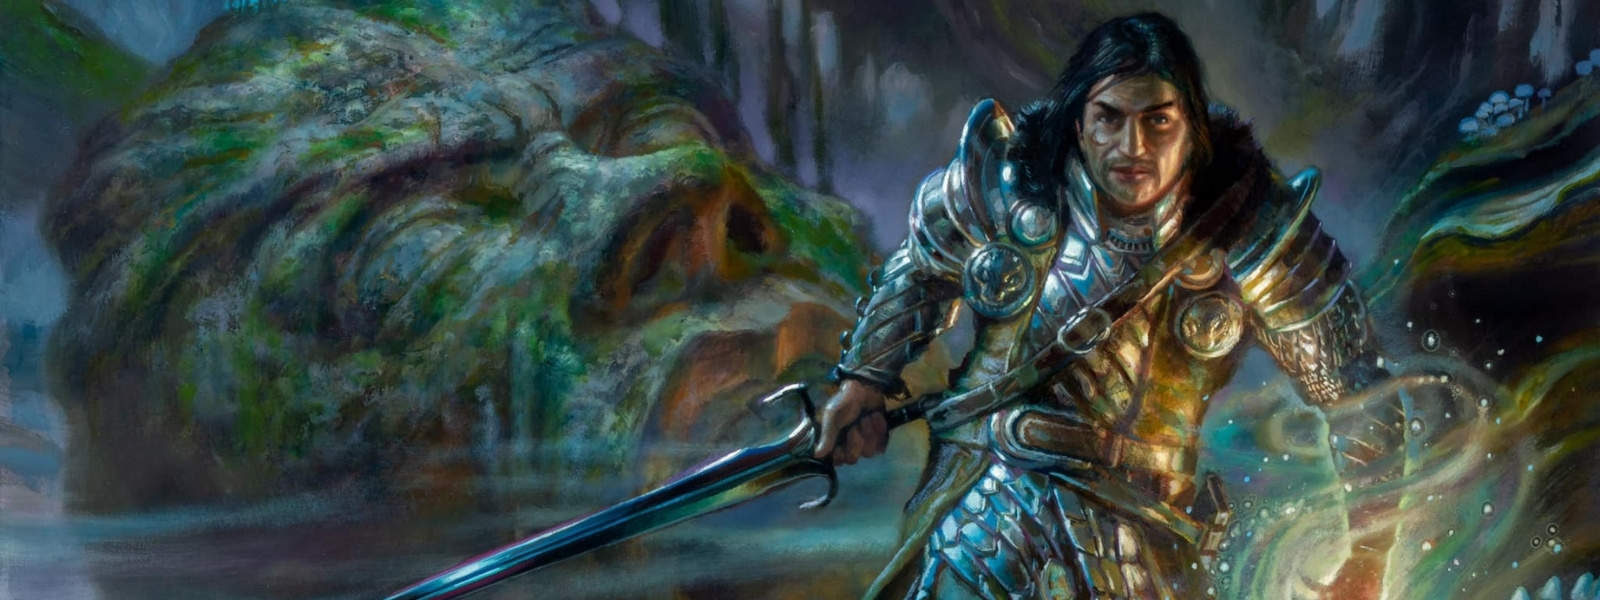 Dnd Paladin Oath Of The Ancients Oath of the Ancients Paladin 5e Guide: The Green Knight – Black Citadel RPG